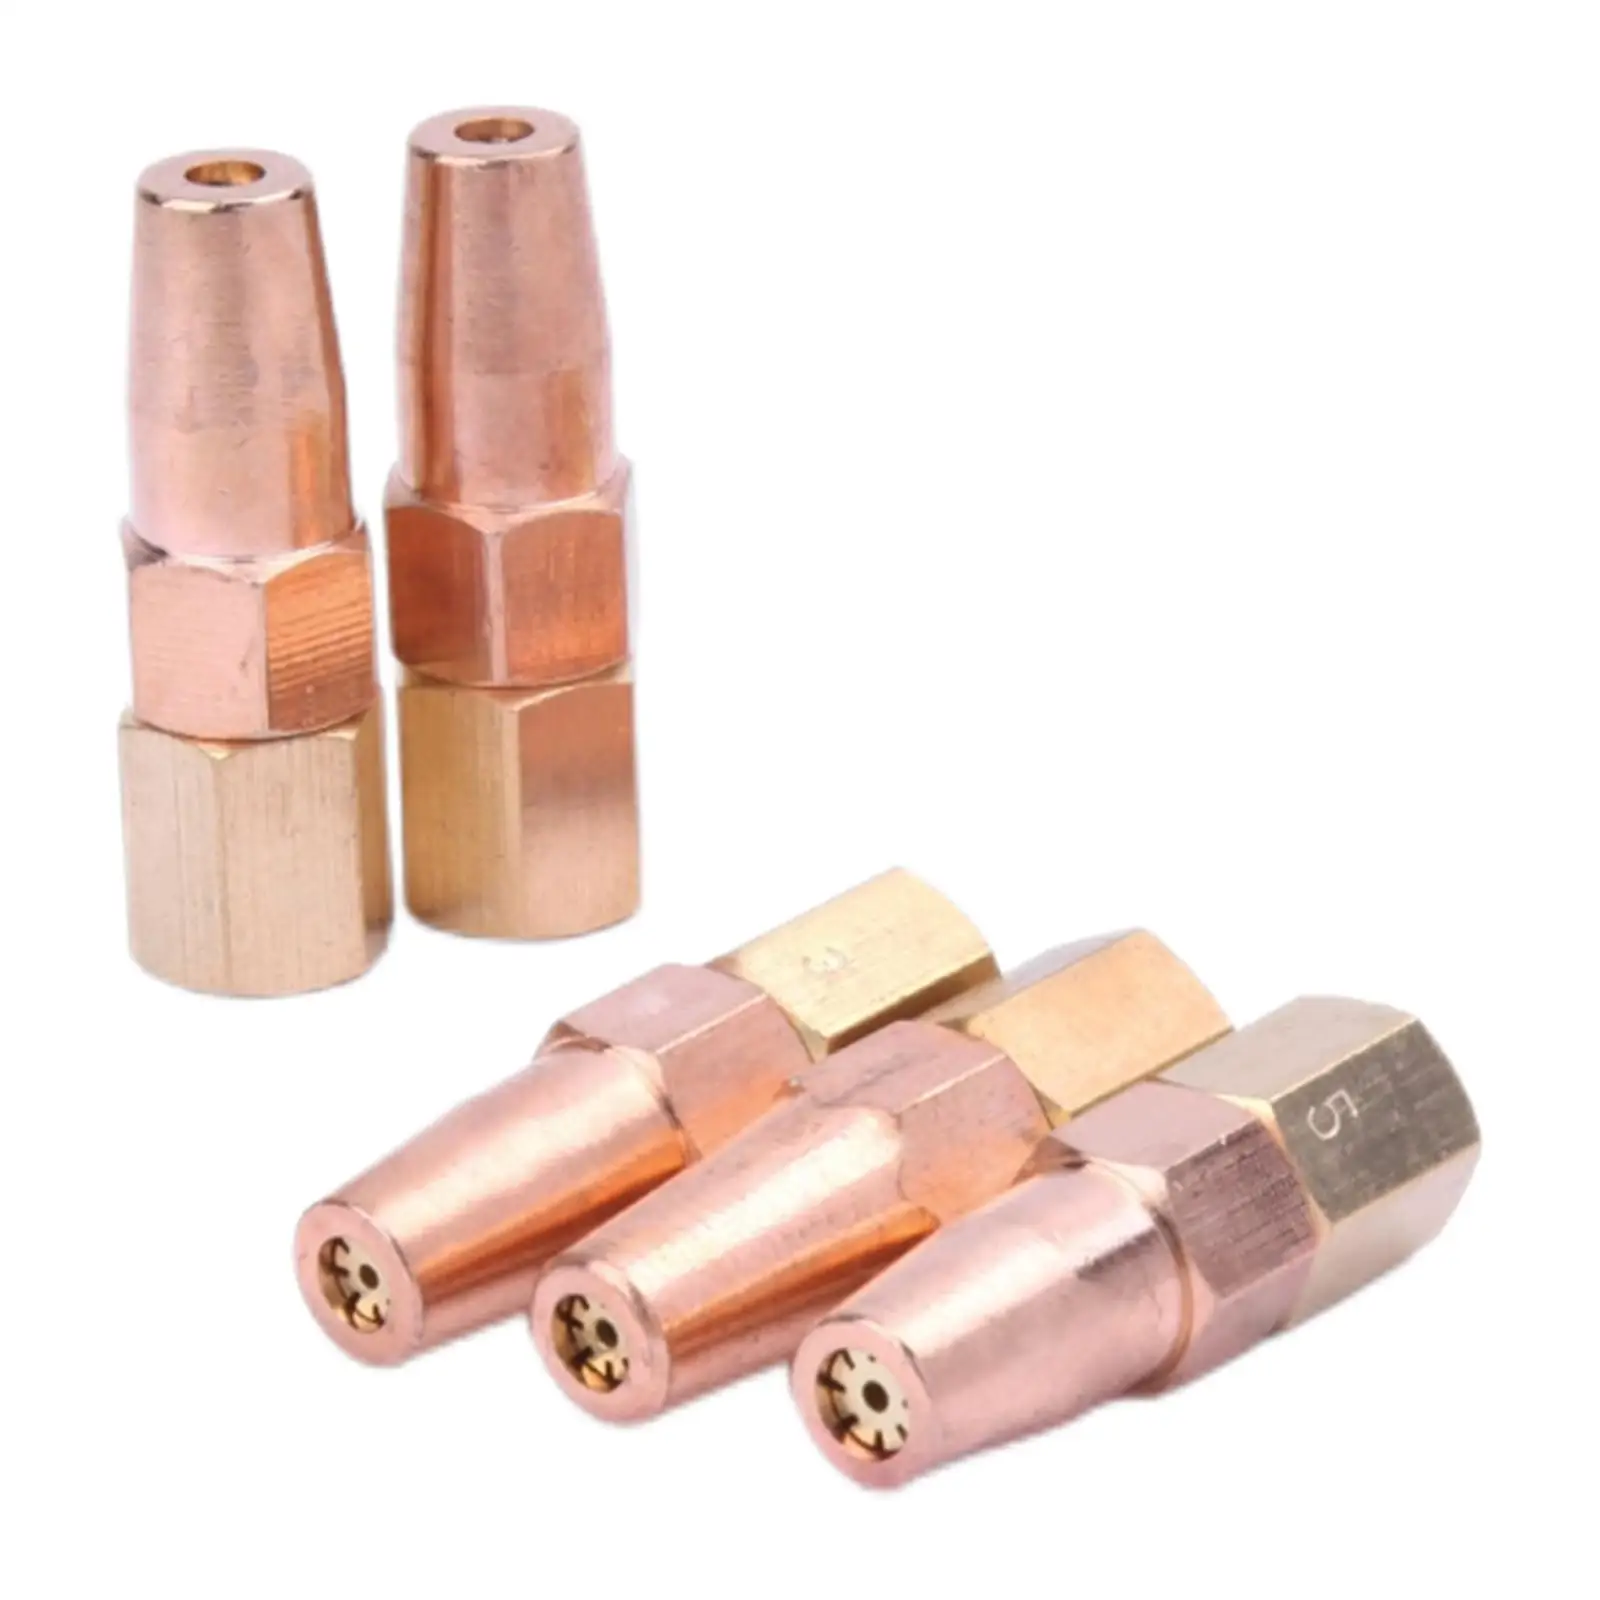 5x Propane Gas Welding Nozzle H01-6 Gas Nozzle Heating Nozzle Tip for Heat Treating Metal Bending Thermal Metal Expansion